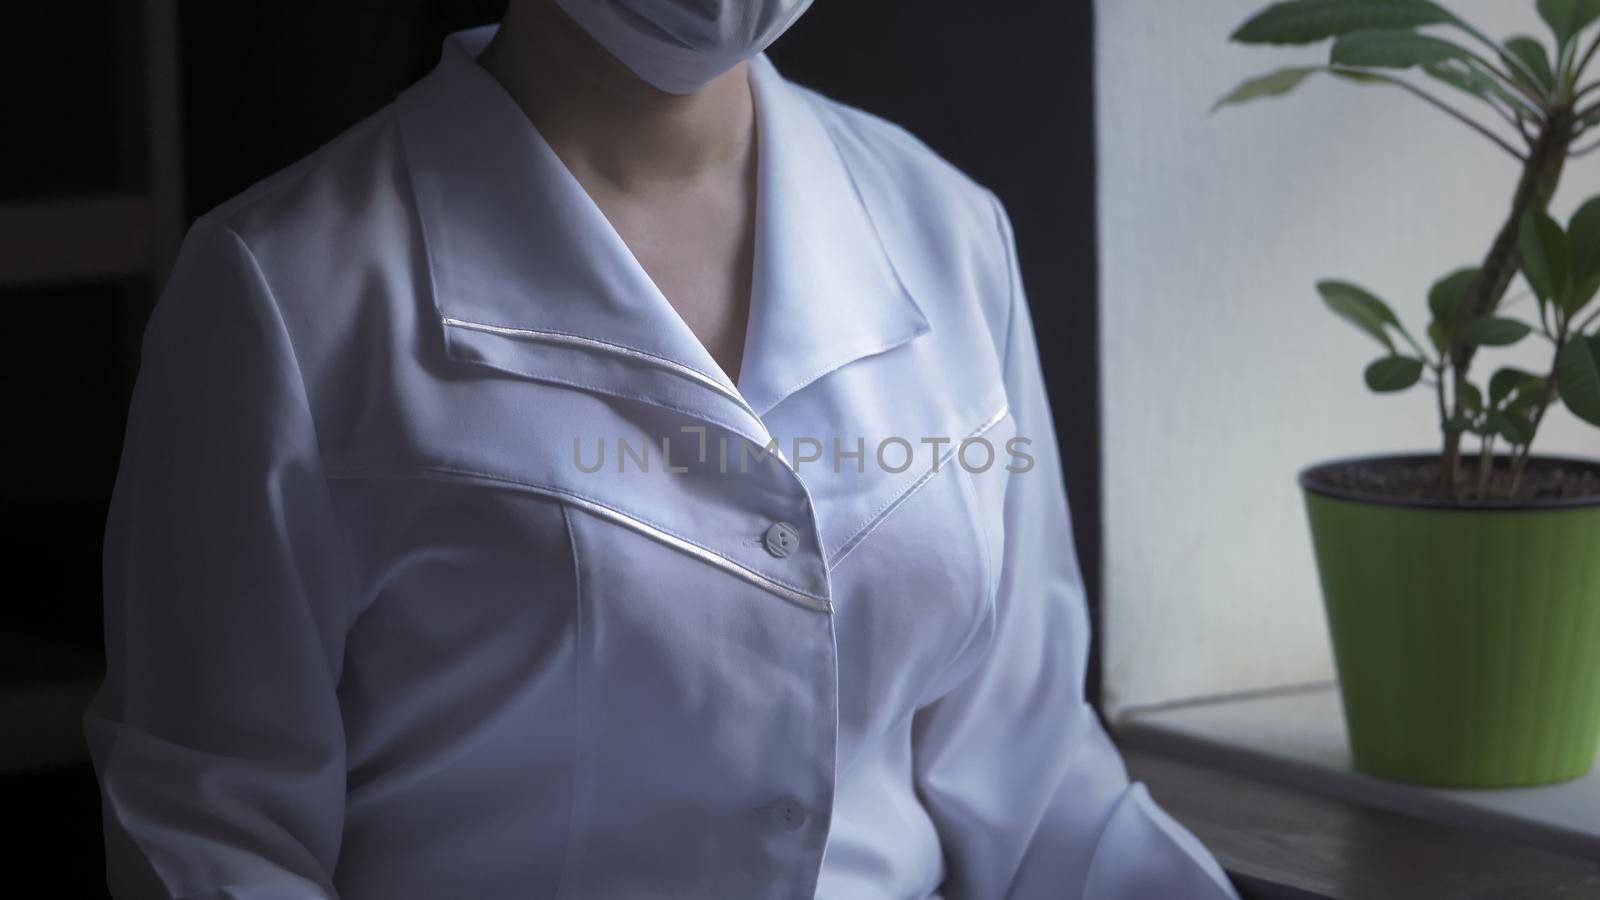 Female Medical Worker In A White Medical Coat Standing Near Window With Green Plant In Pot On It, Doctor In His Medical Office, Unrecognizable Portrait Of Female Doctor, Cropped Image